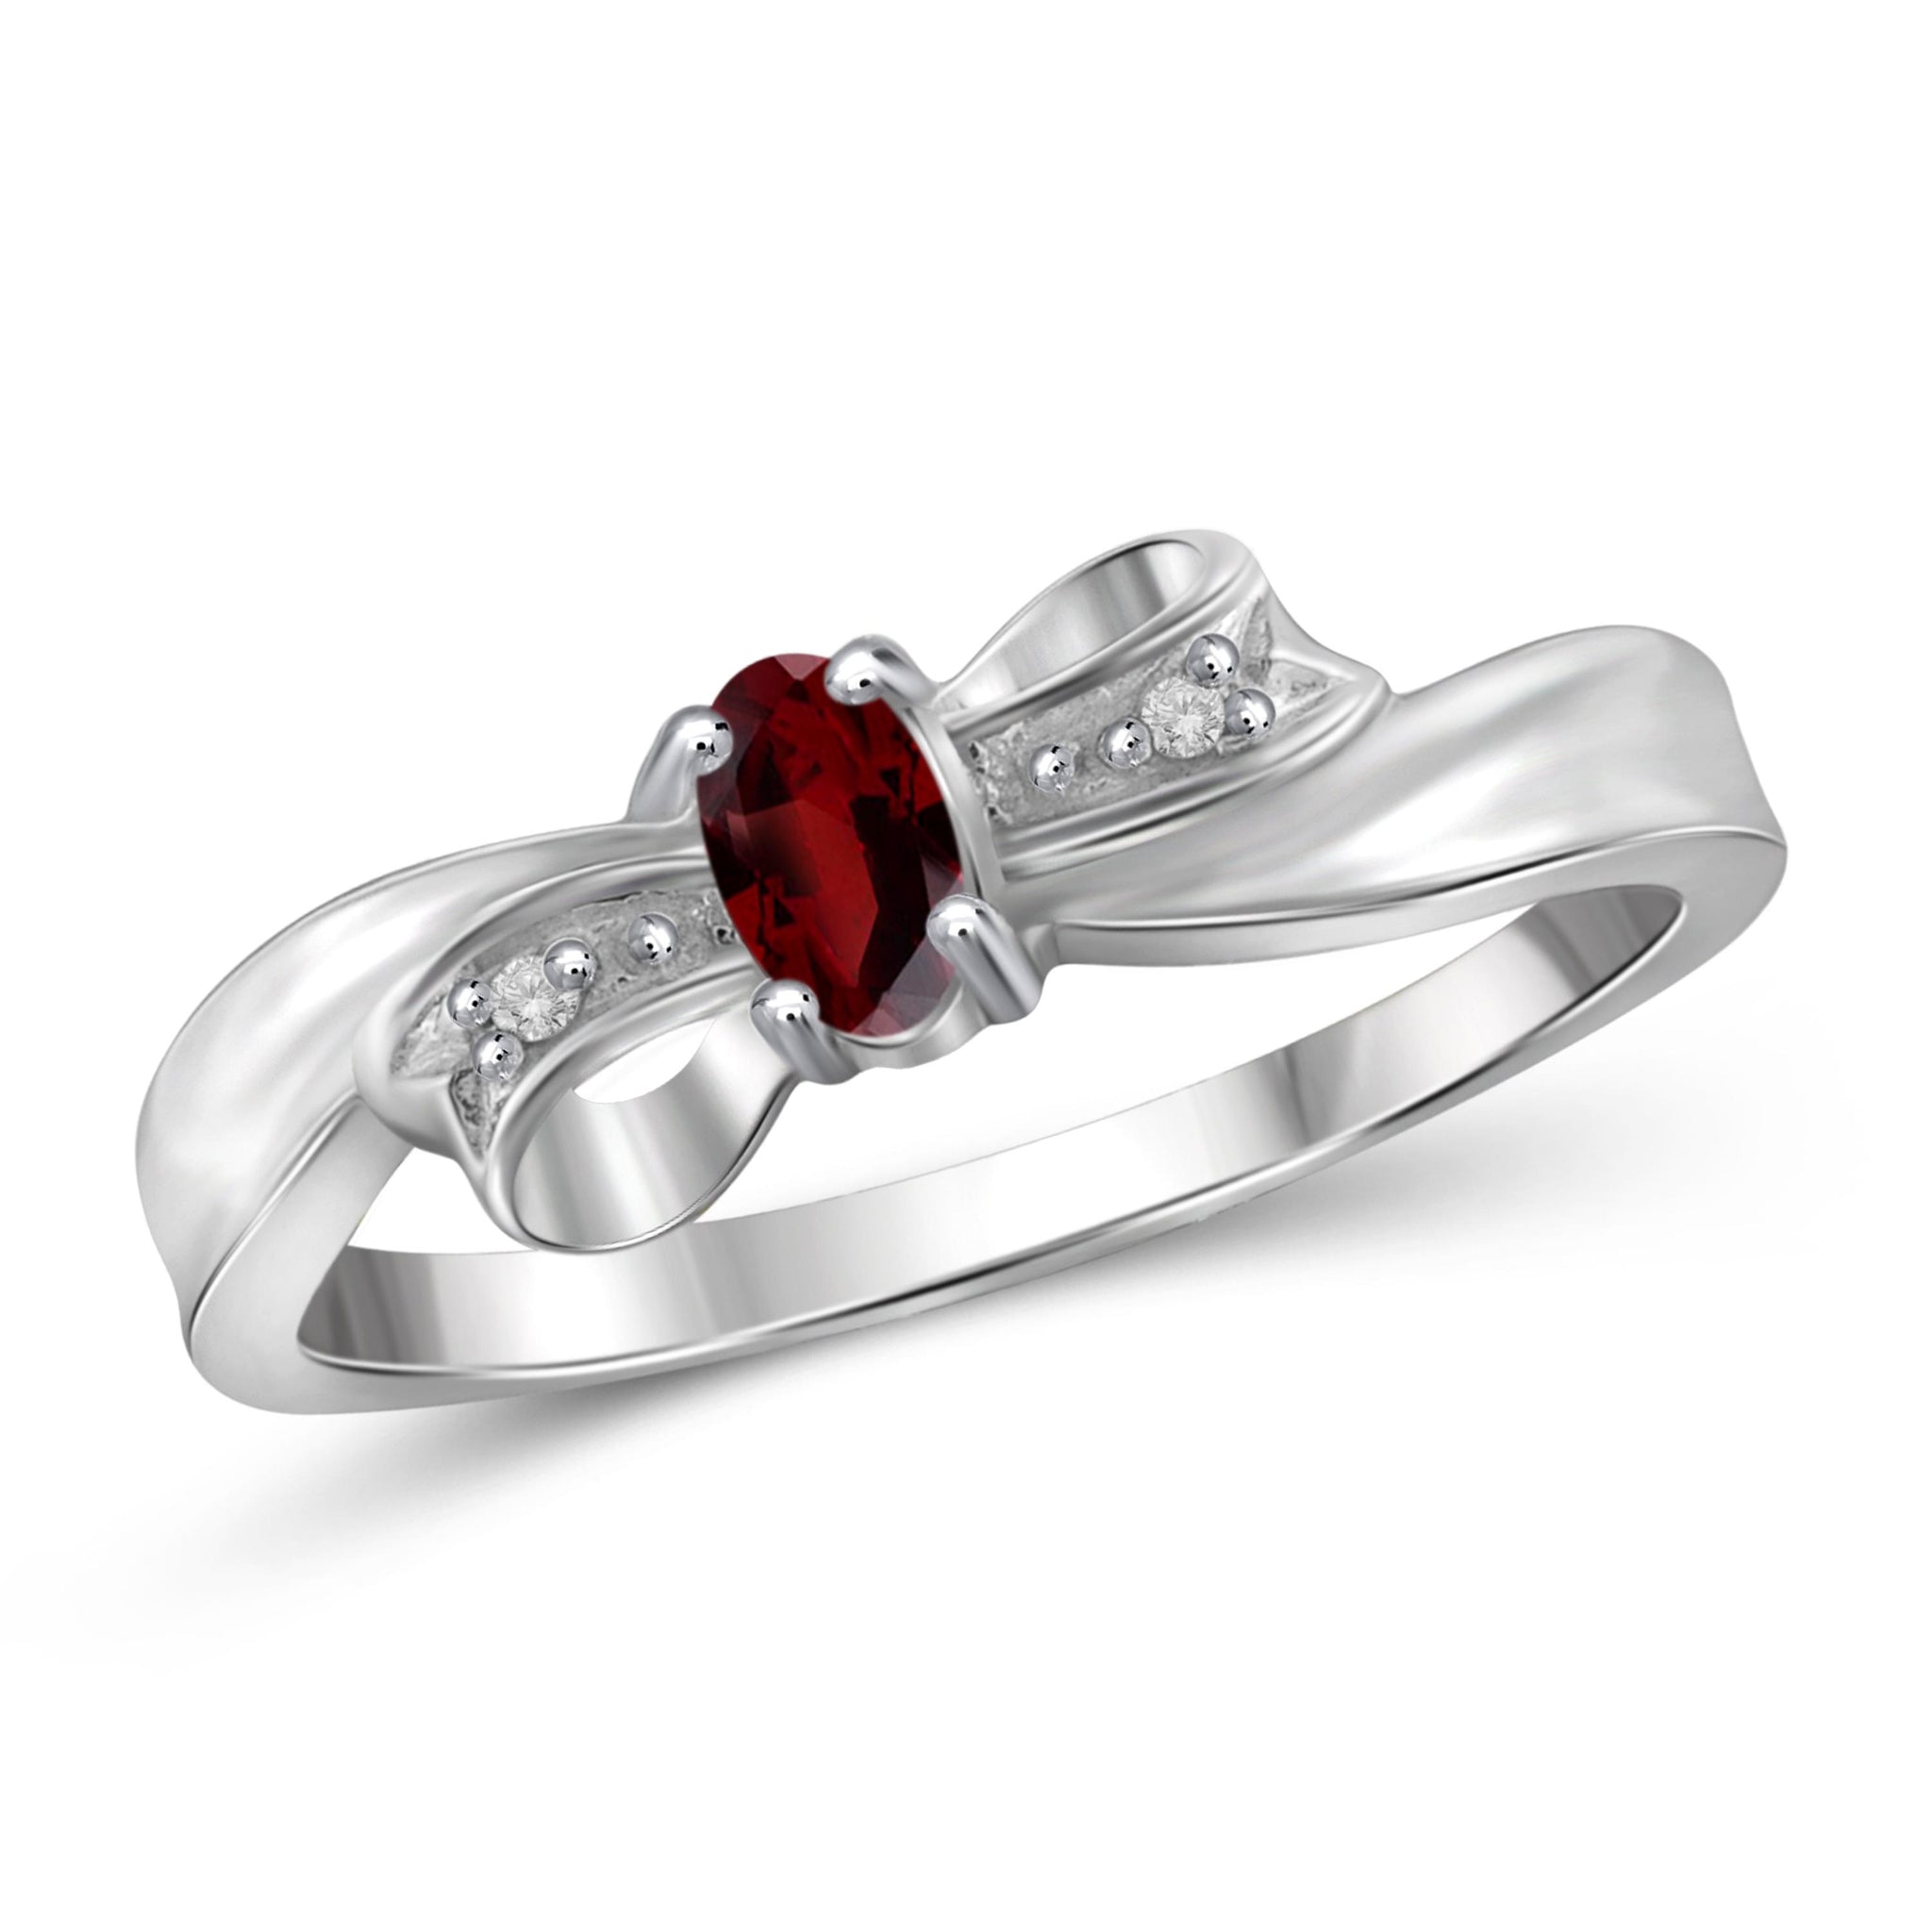 JewelonFire 1/3 Carat T.G.W. Garnet And White Diamond Accent Sterling Silver Ring